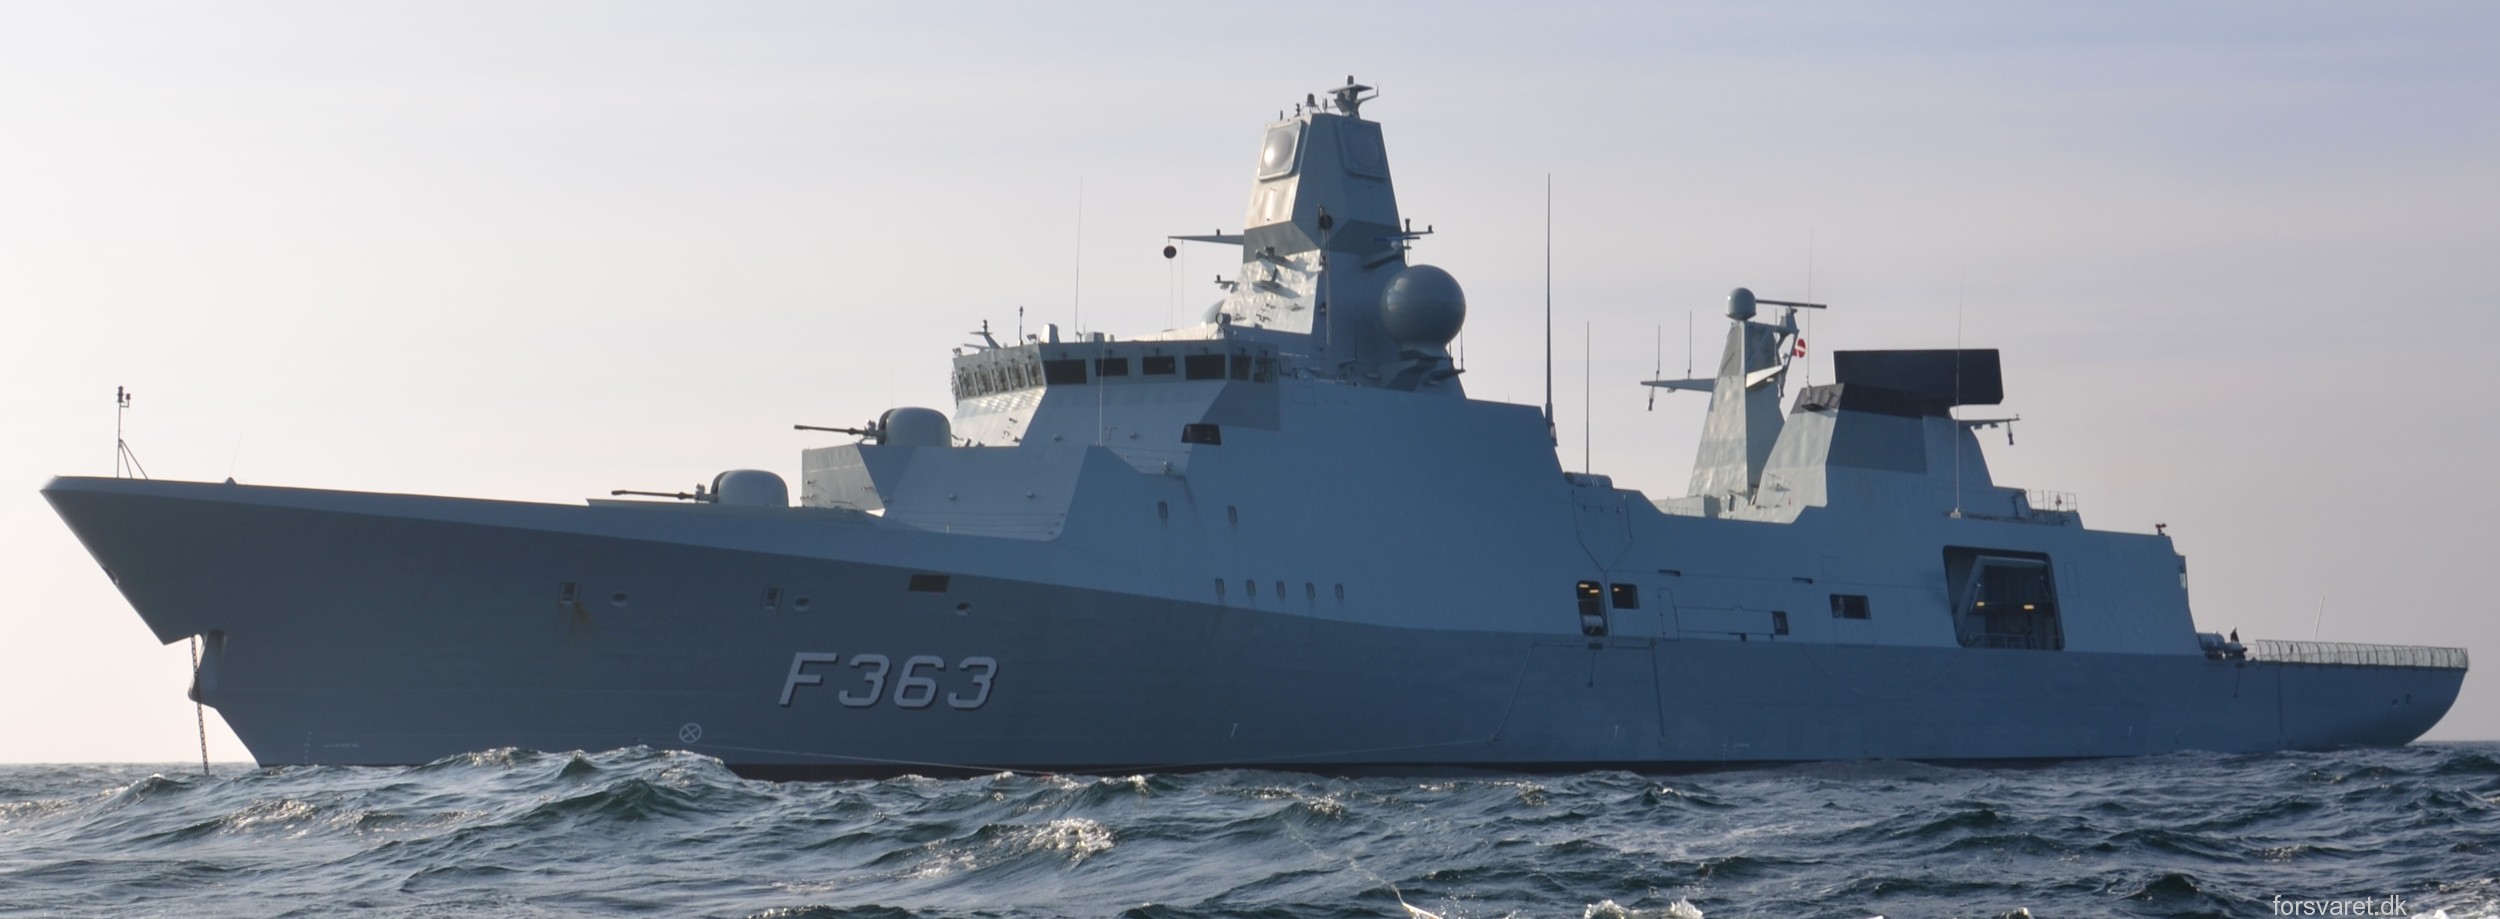 f-363 hdms niels juel iver huitfeldt class guided missile frigate ffg royal danish navy 36